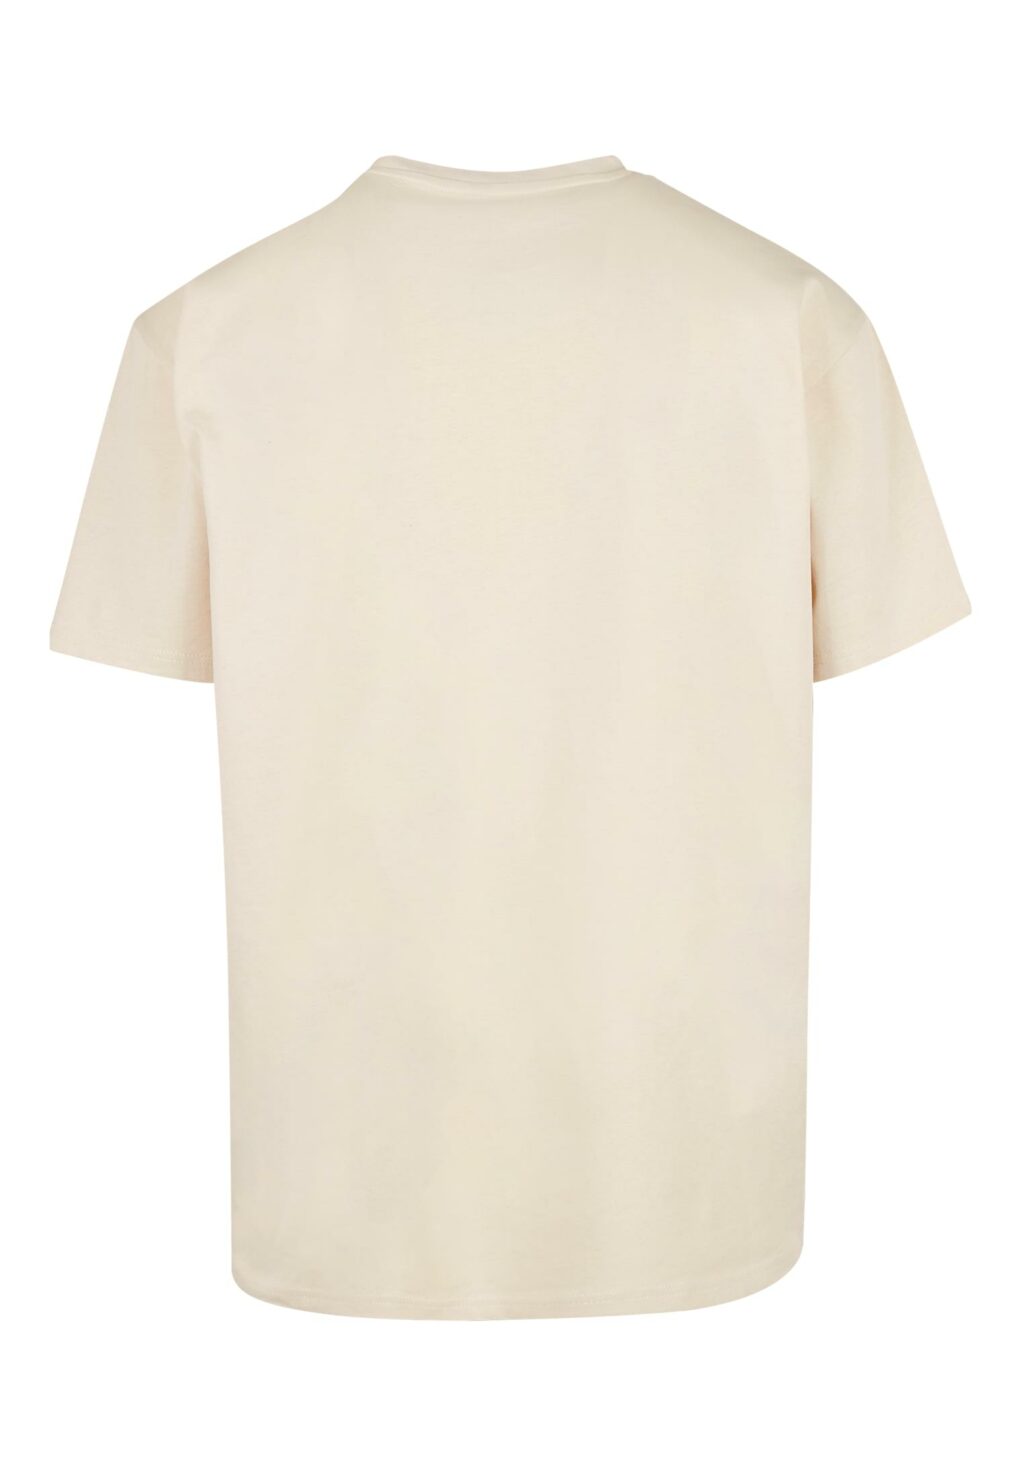 L.A. College Oversize Tee sand MT2462